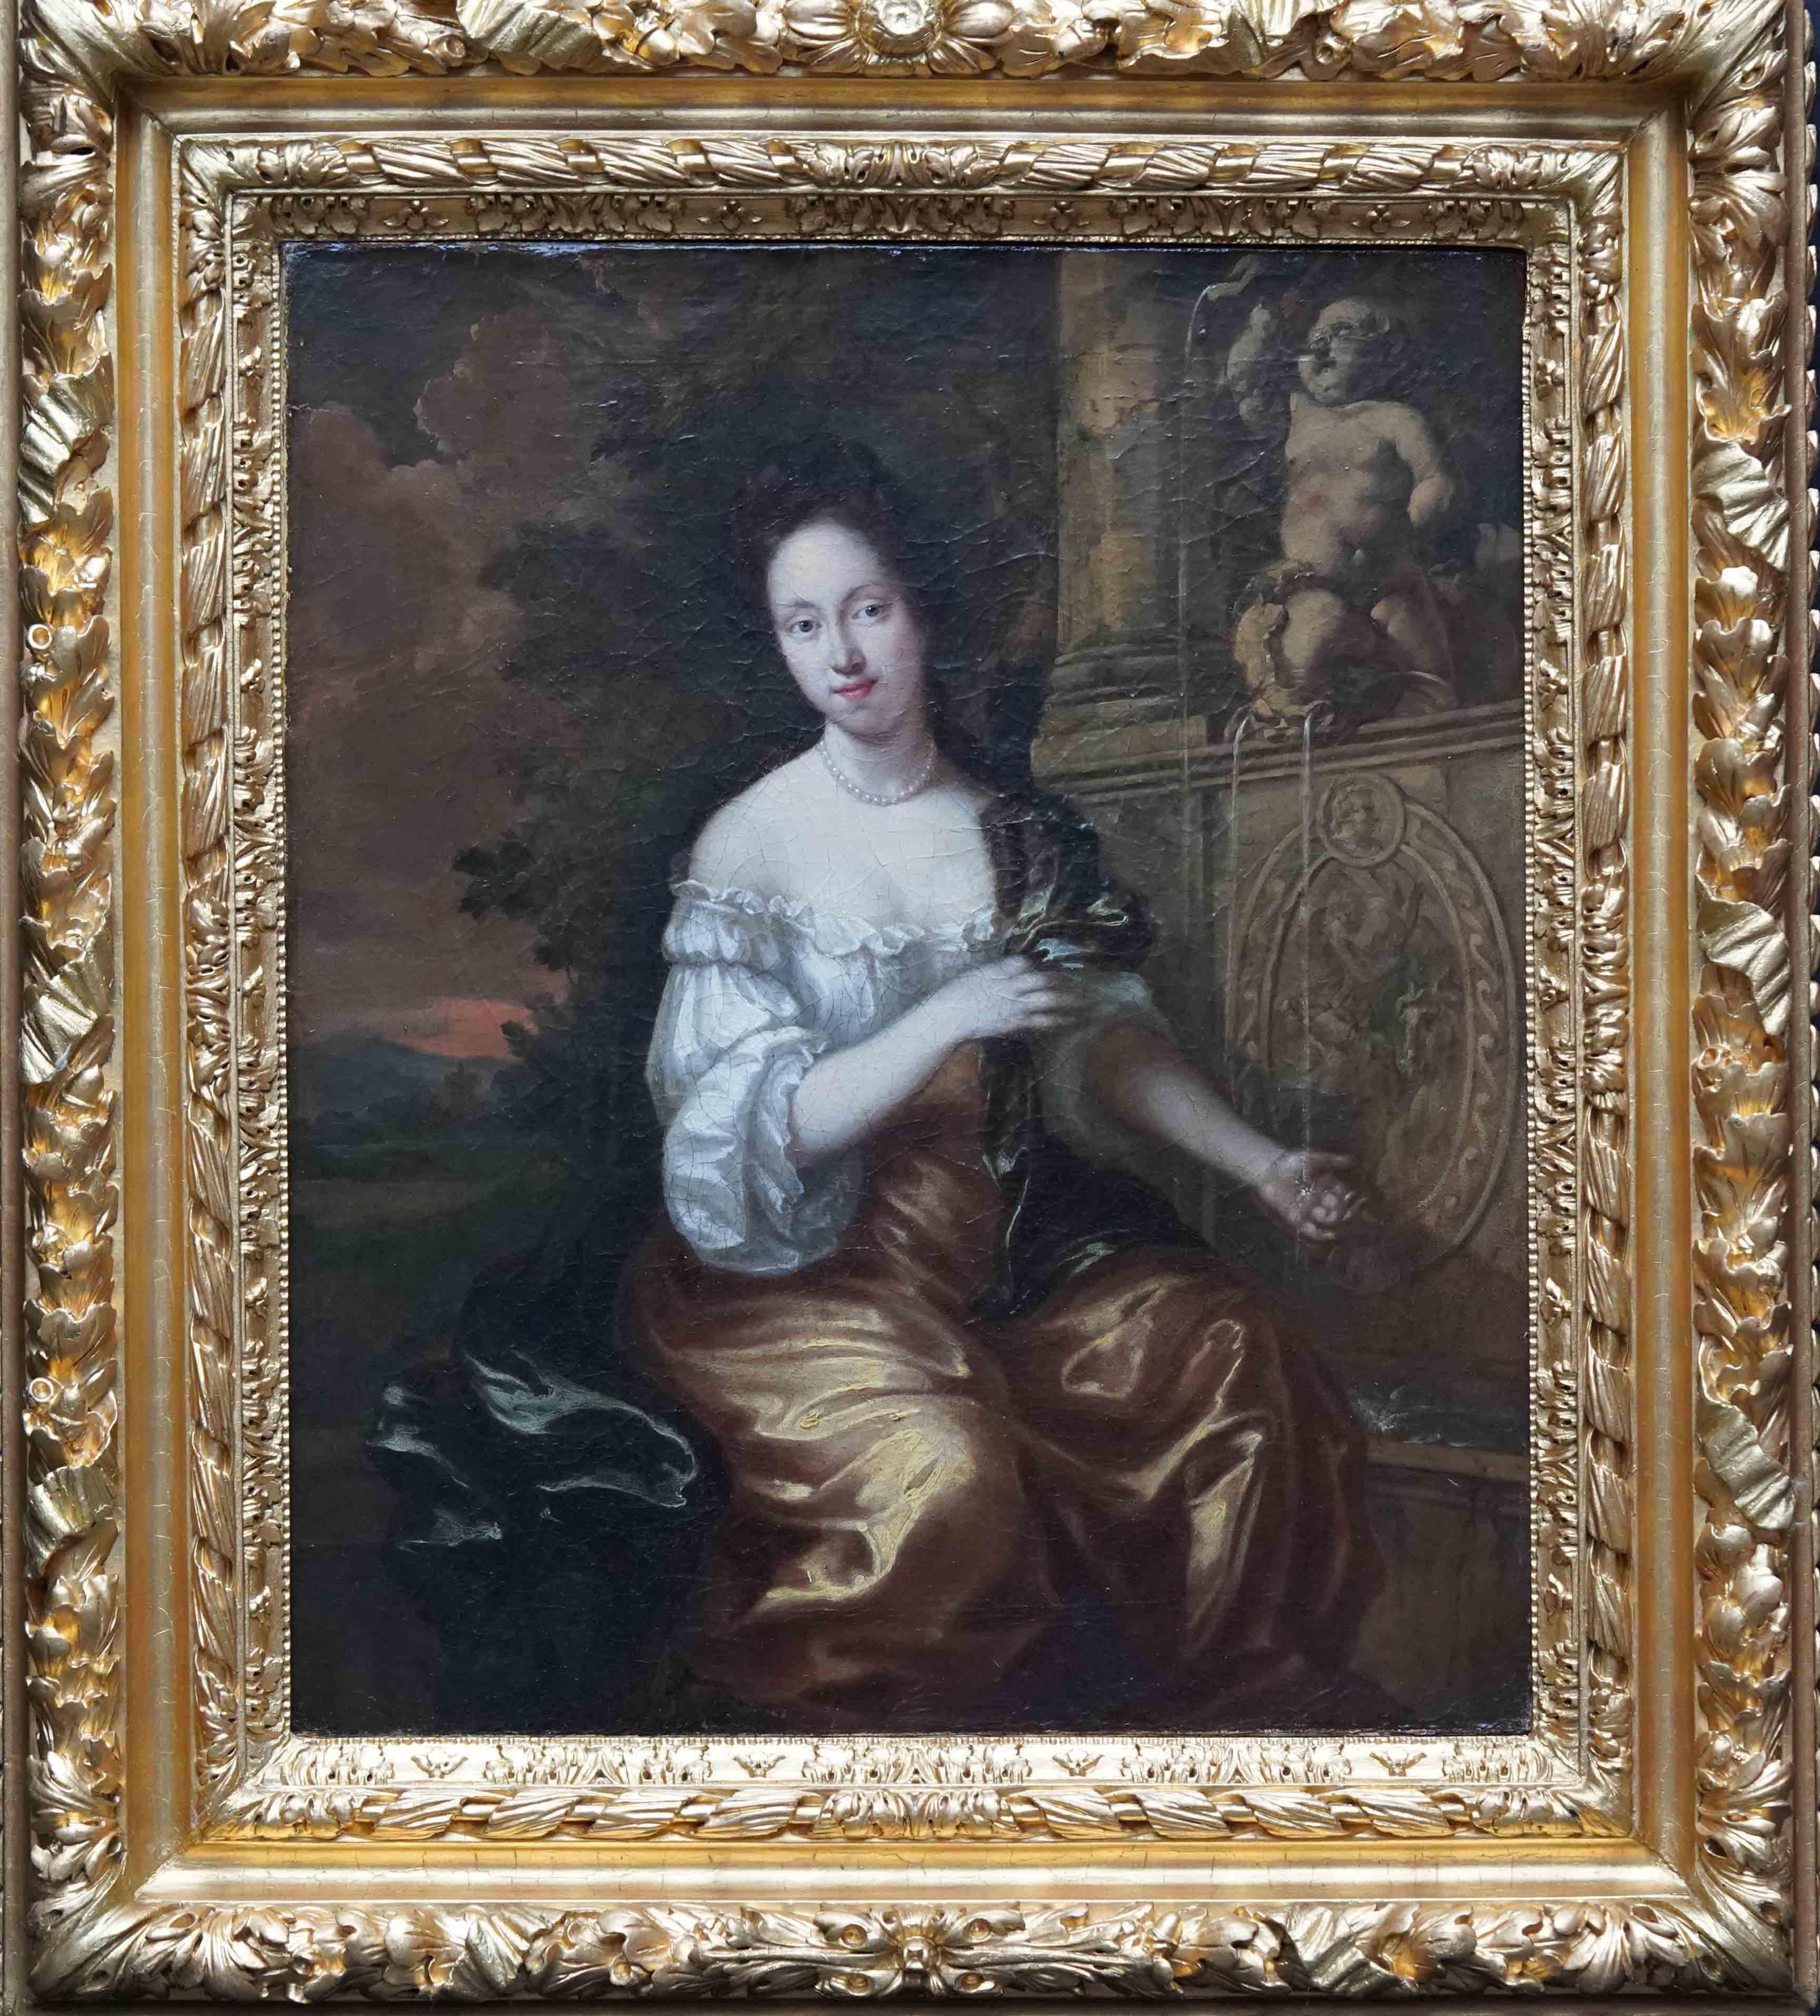 Nicolaes Maes Portrait Painting - Portrait of a Lady by Fountain in Landscape - Dutch Old Master art oil painting